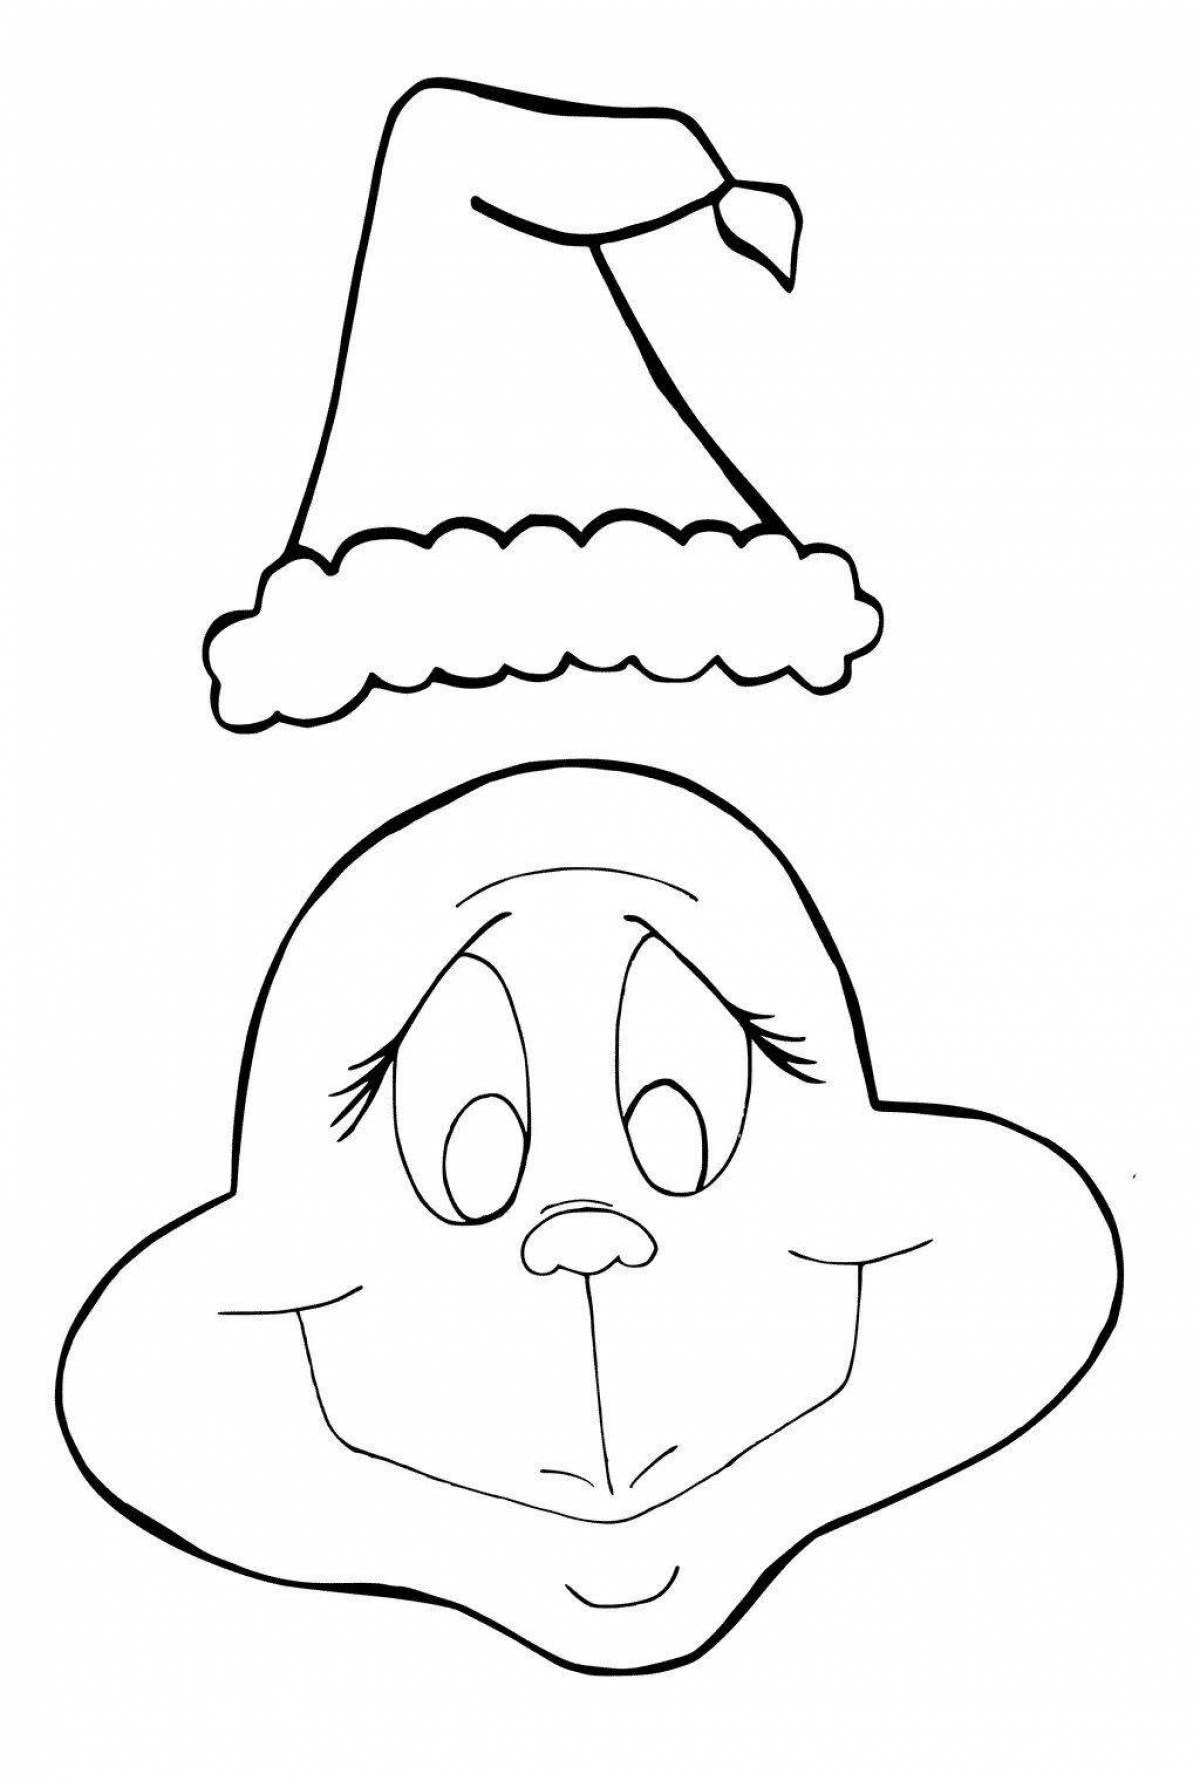 Grinch face content coloring page